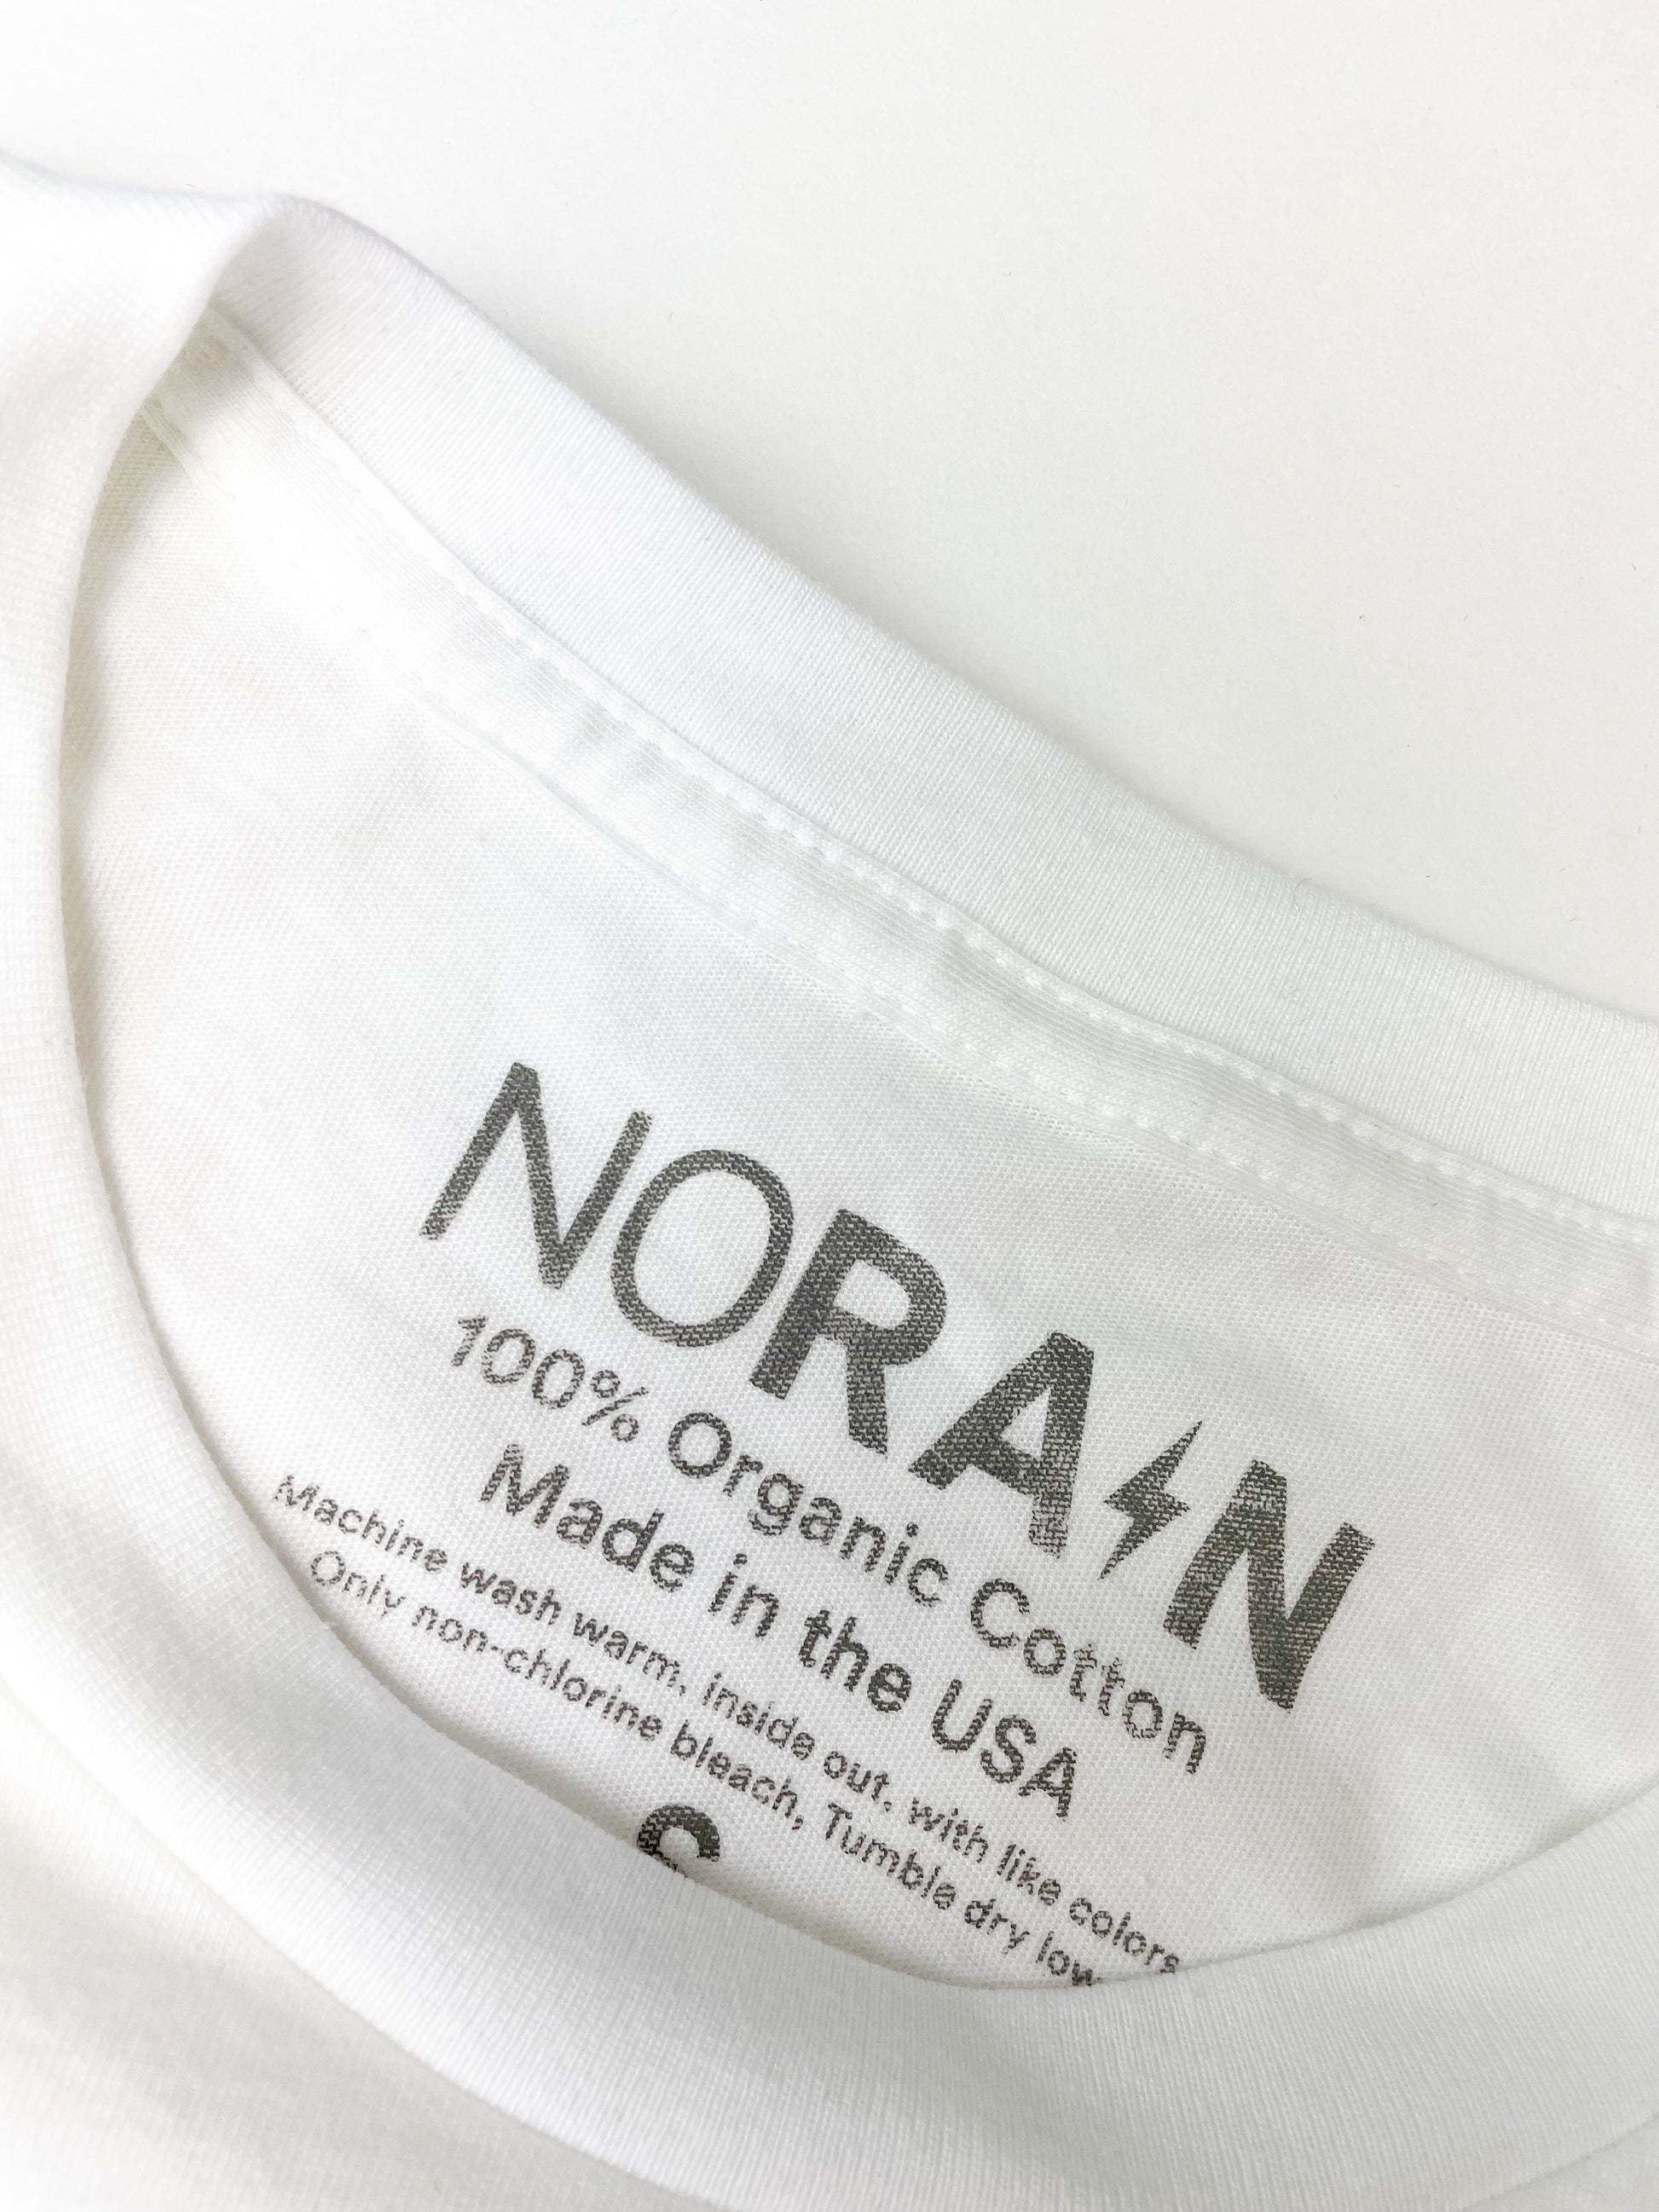 100% organic cotton, made in the United States.